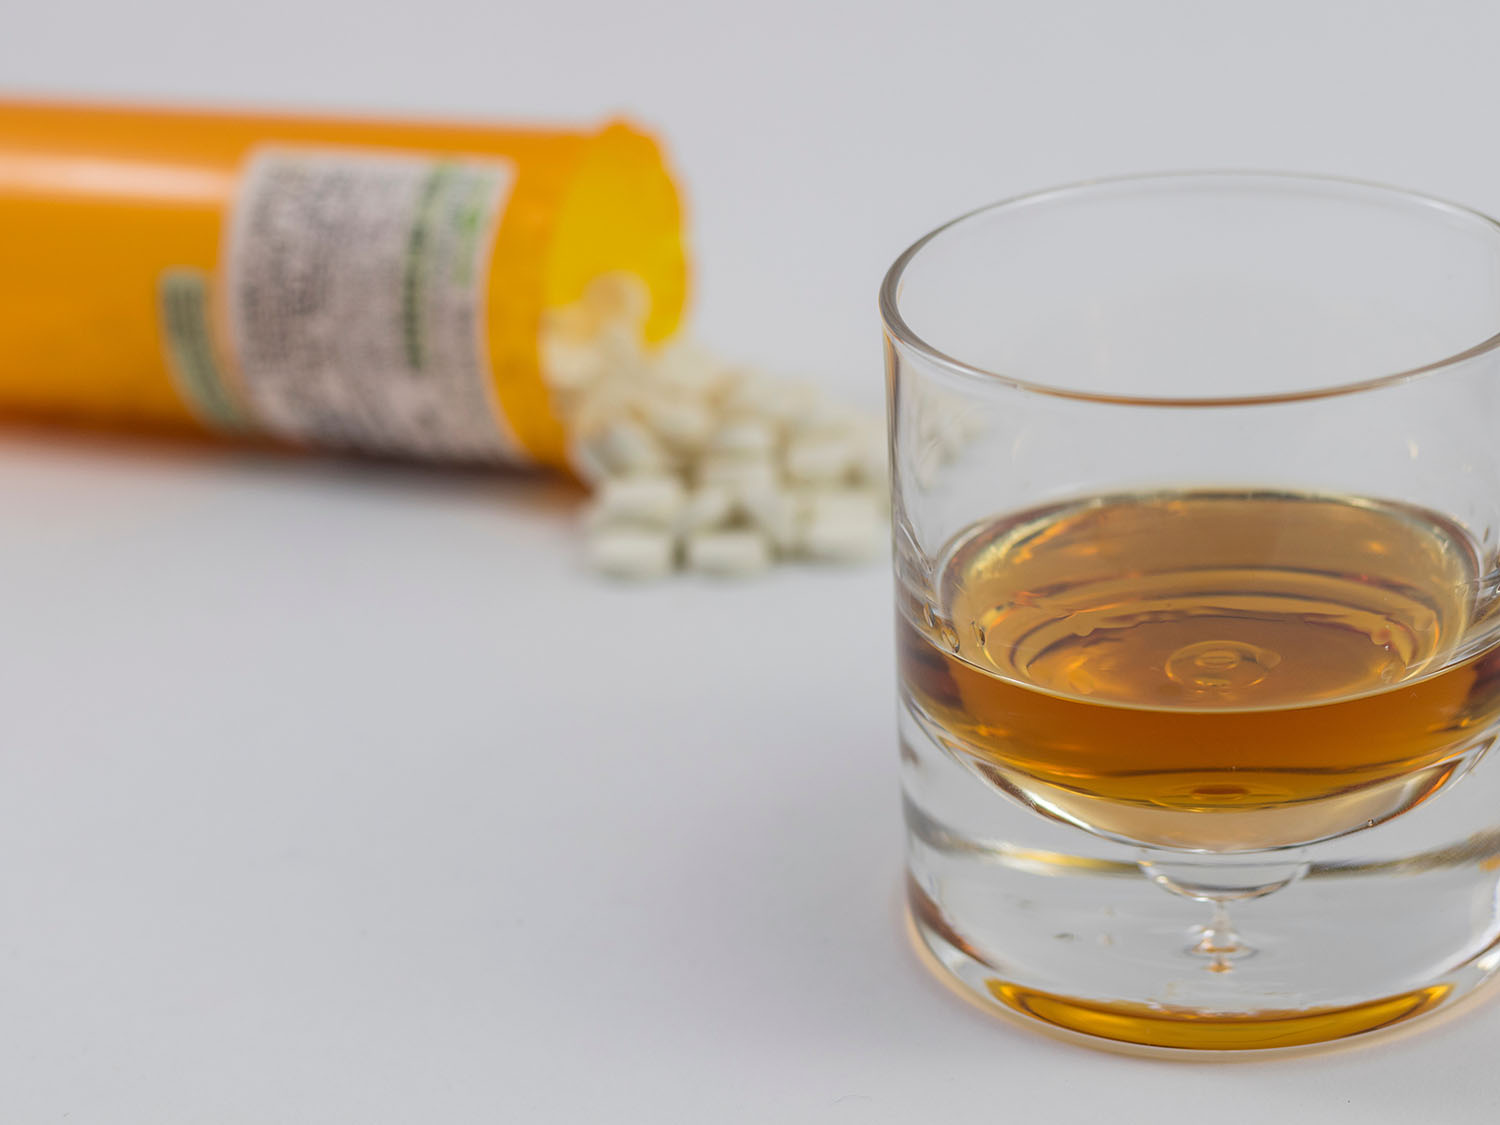 Alcoholism and Post-Surgical Pain Medication: A Risky Combination